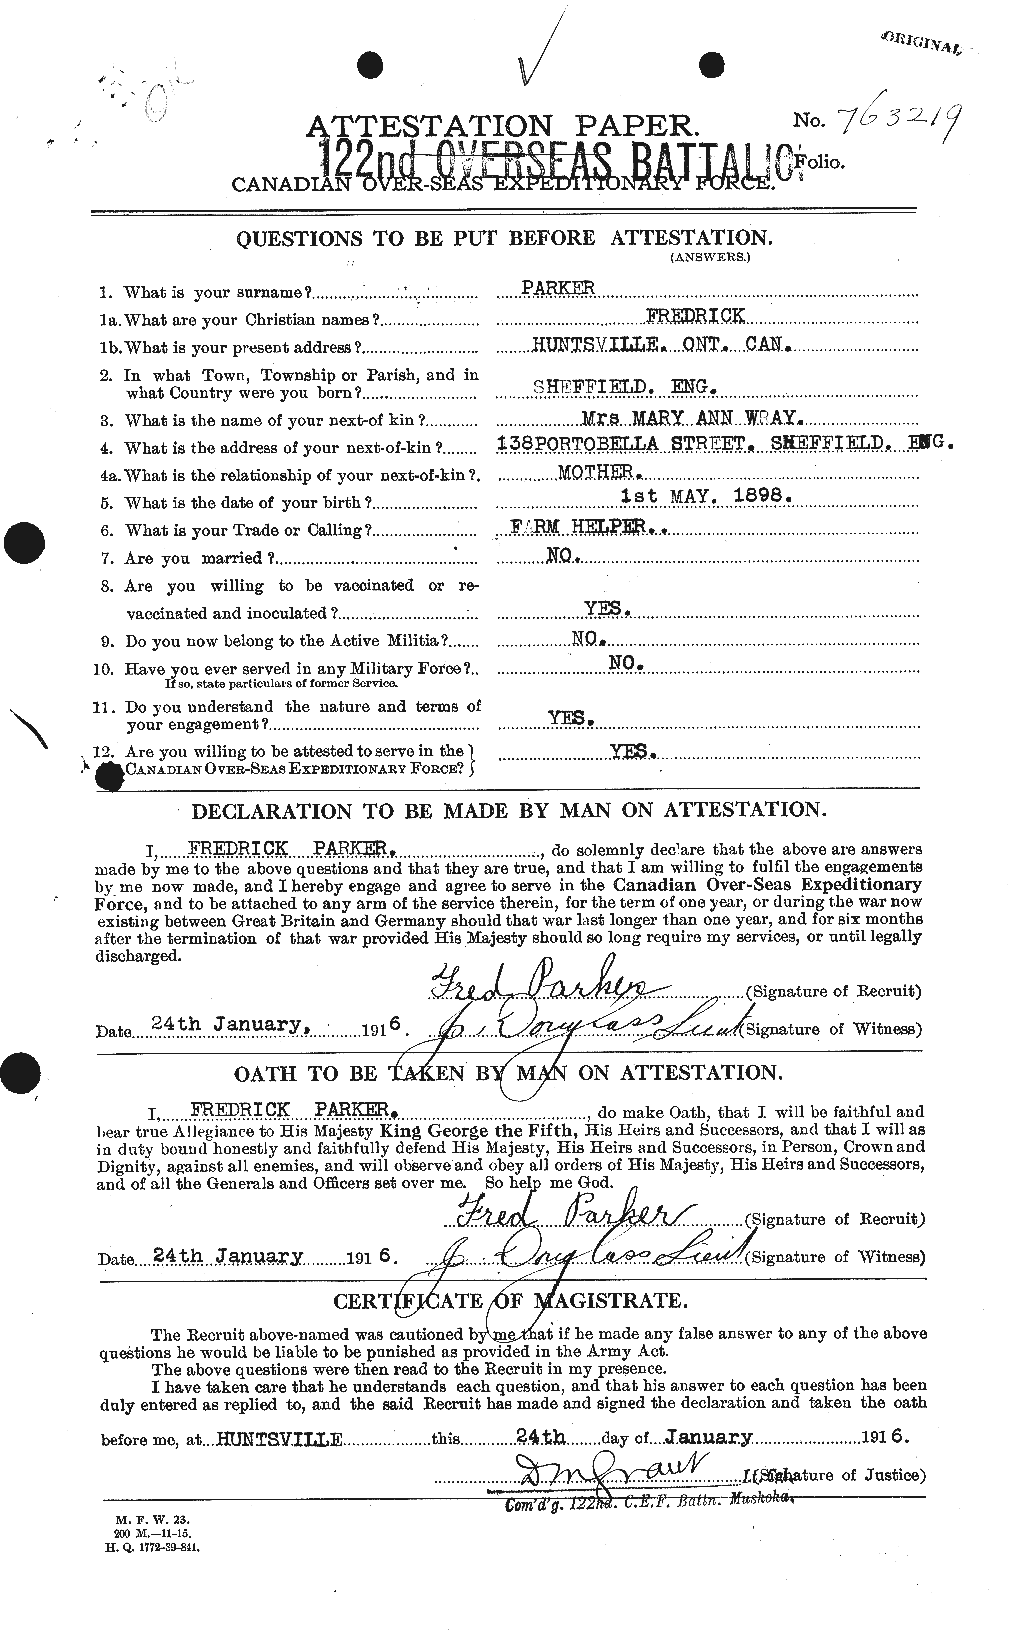 Personnel Records of the First World War - CEF 565226a